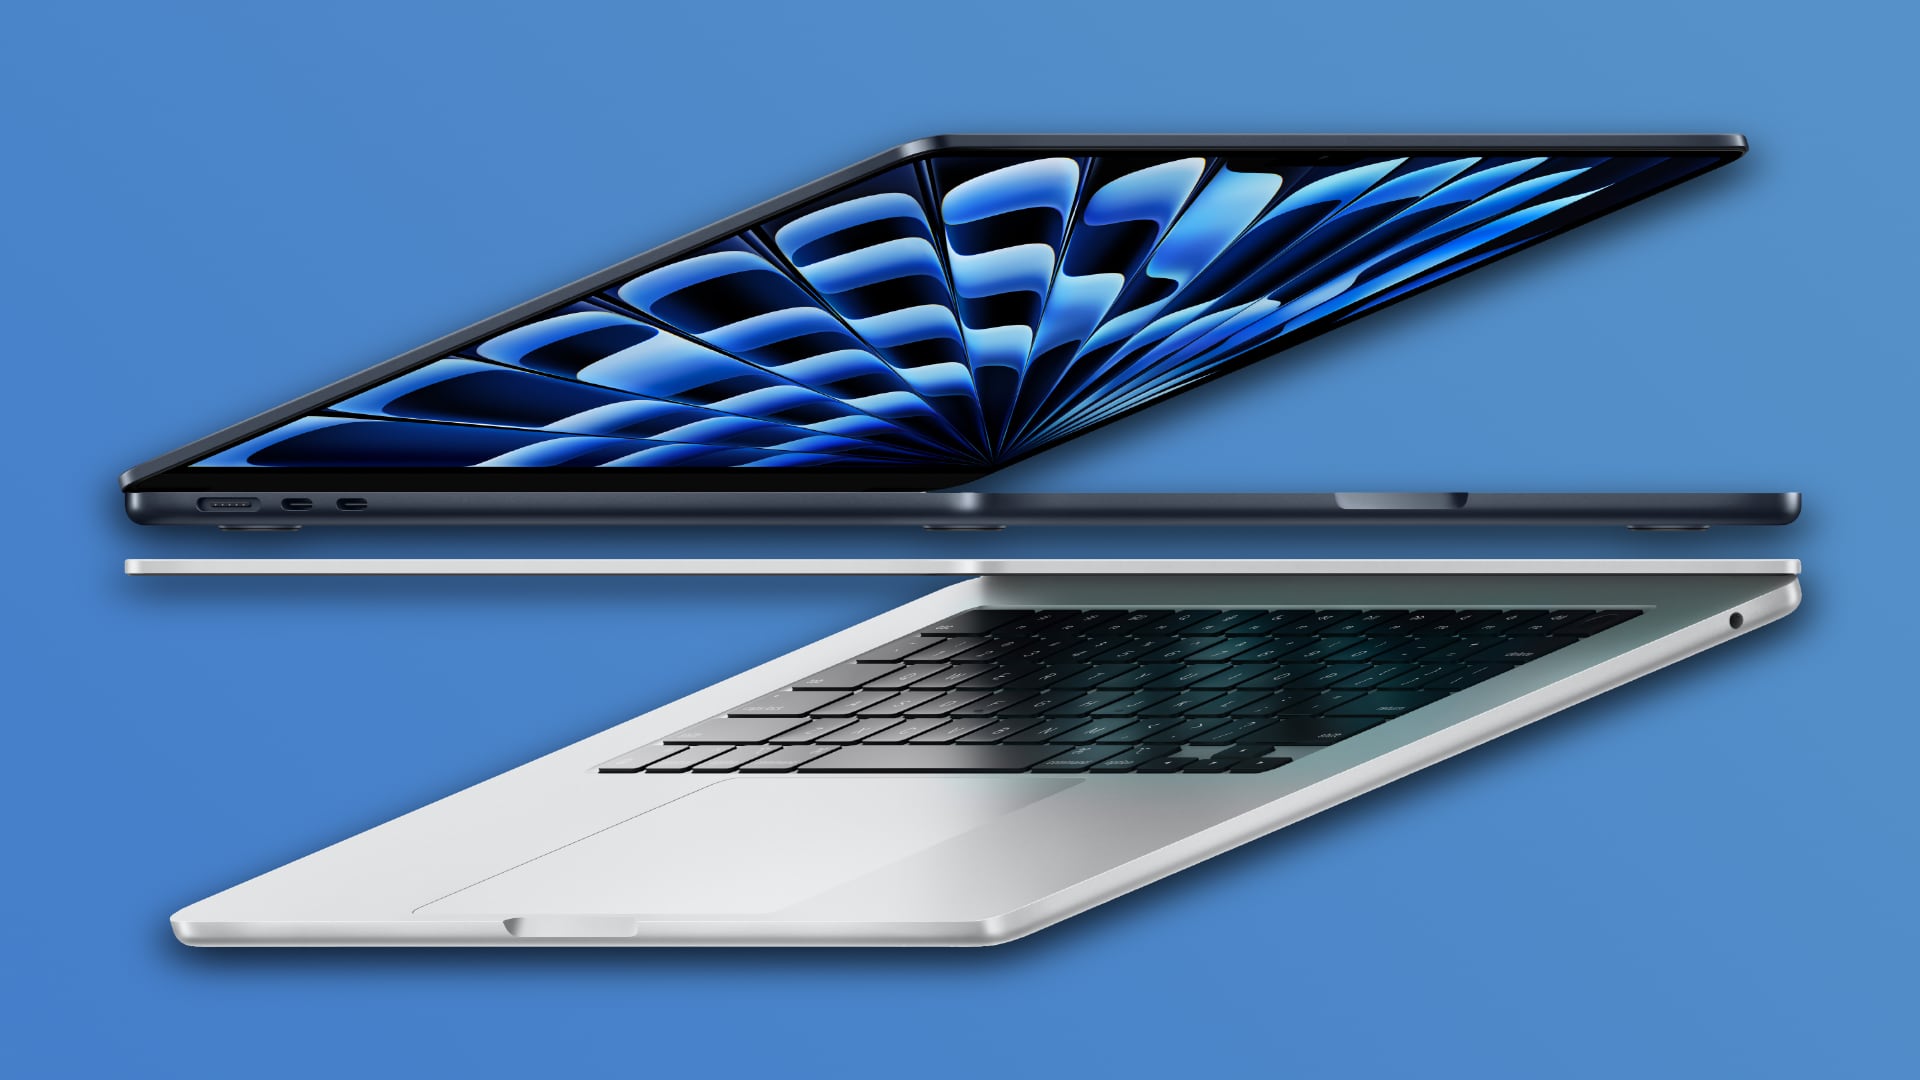 Two M3 MacBook Air laptops with their lids open